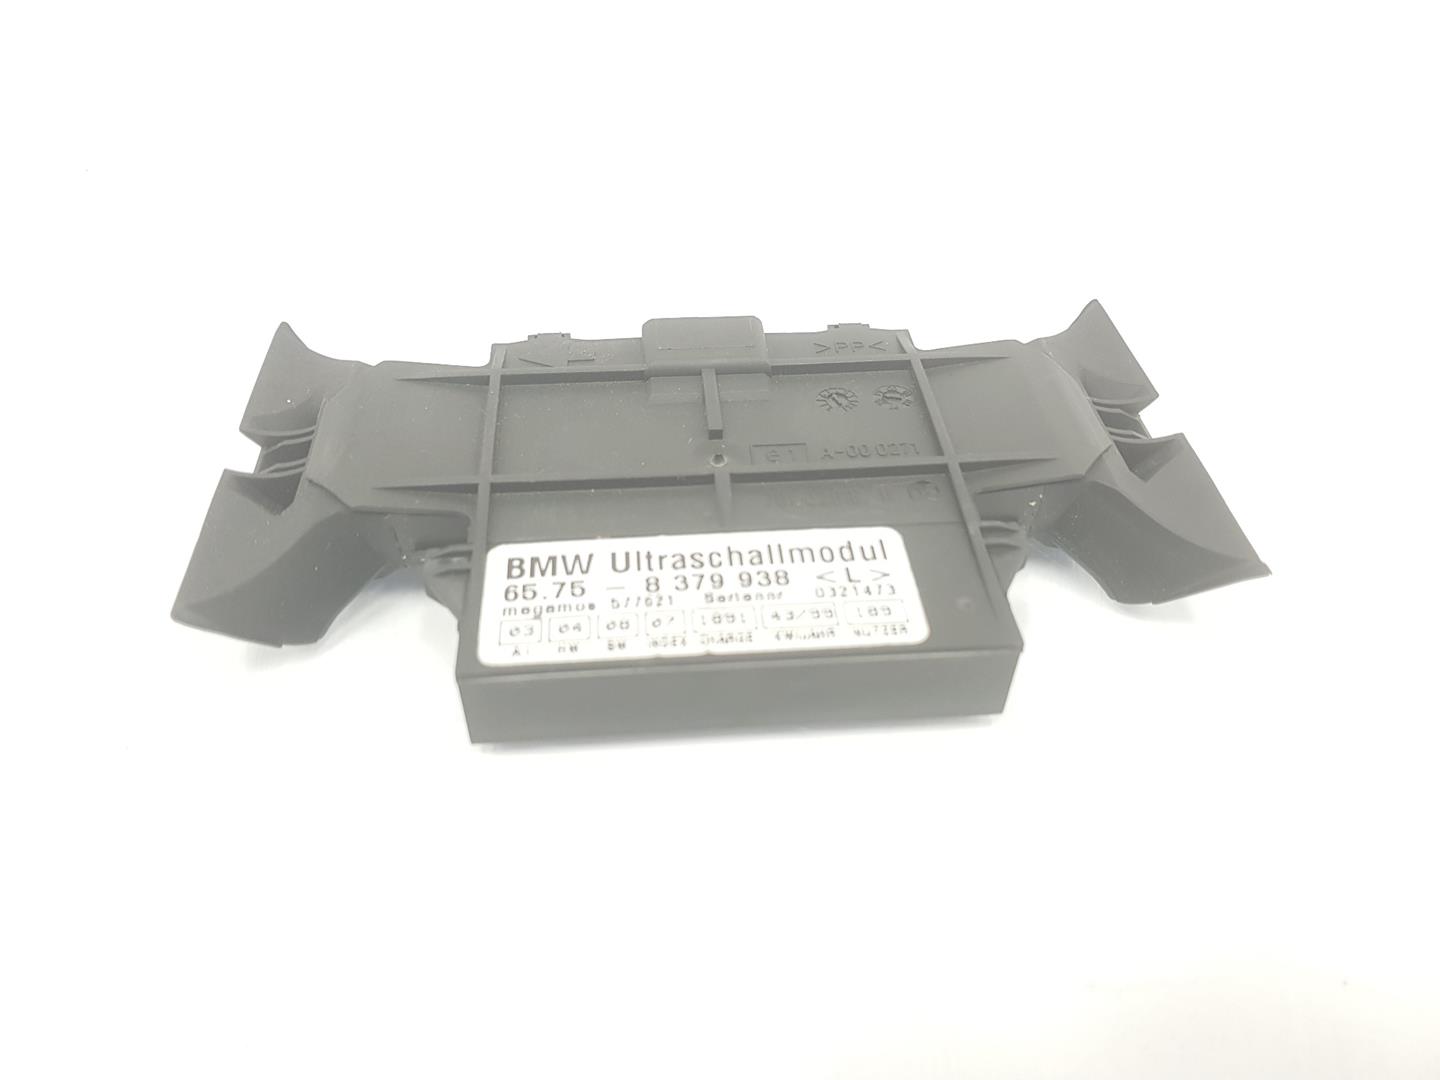 BMW 3 Series E46 (1997-2006) Other Control Units 65758379938, 8379938 19915072